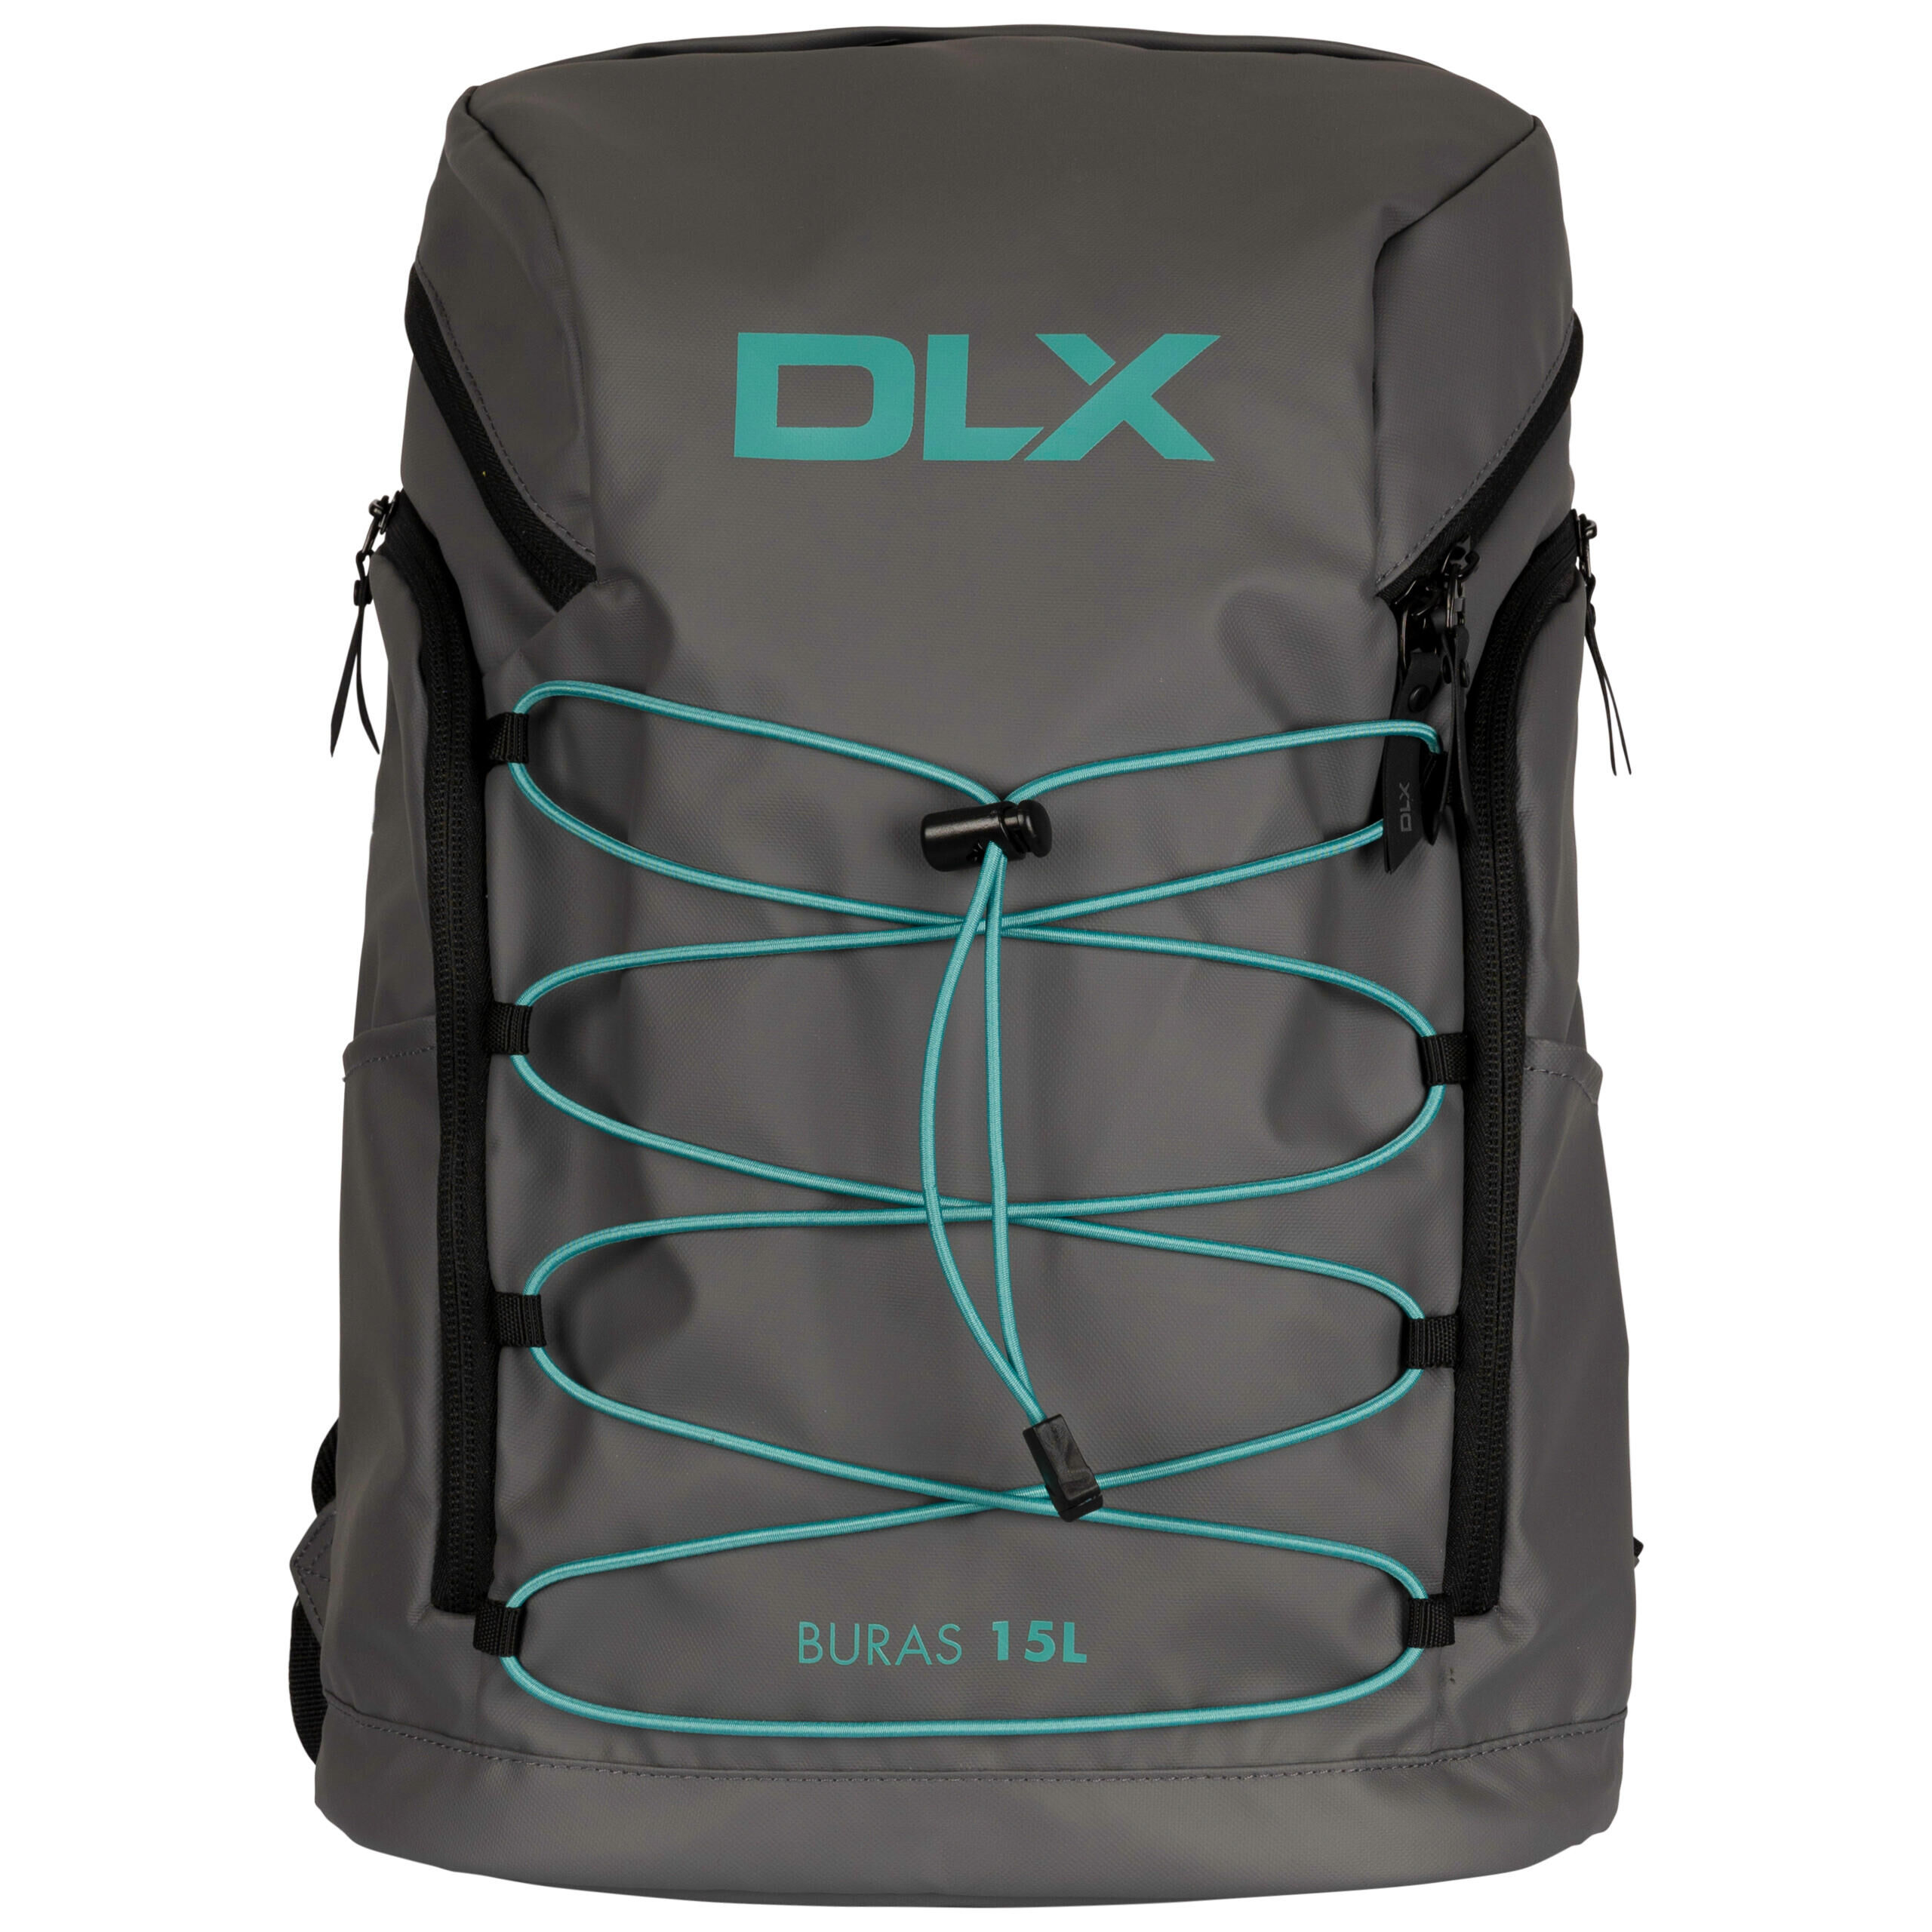 DLX 15L Backpack Rucksack With Carry Handle And Pockets Buras